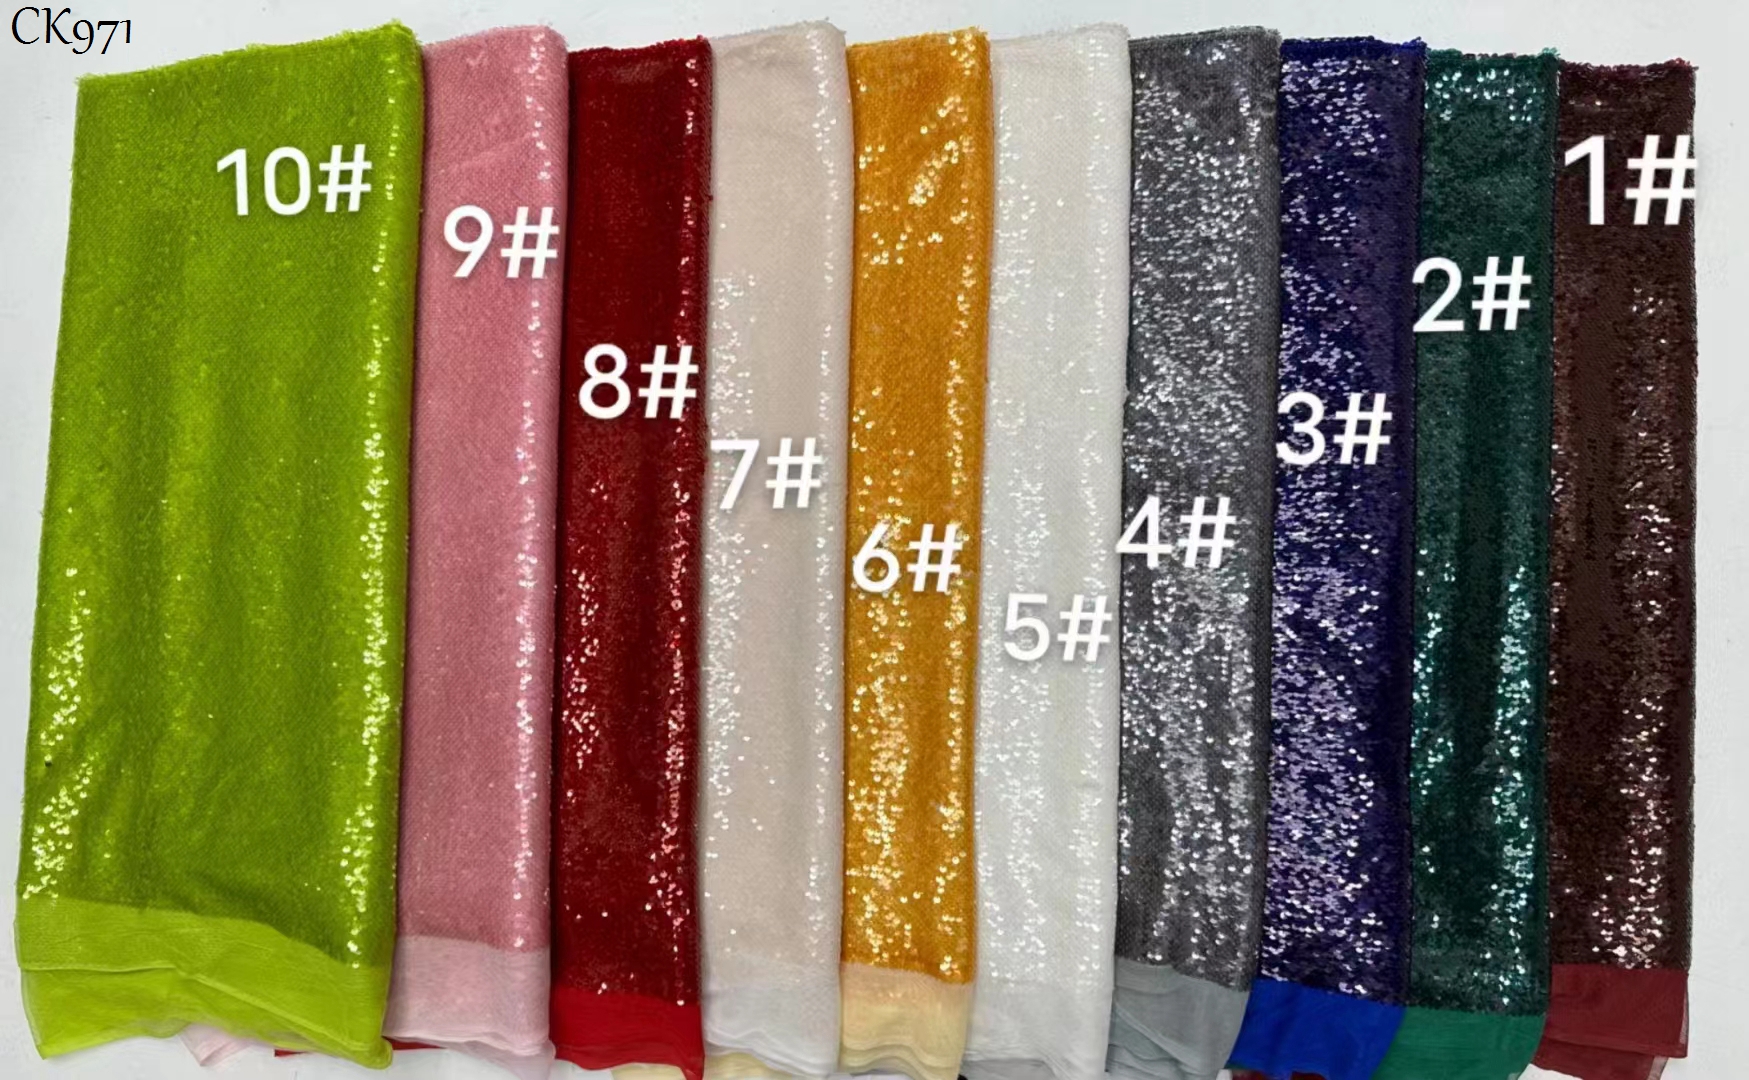 Luxury French Tulle Fabrics Sequins Lace Exquisite Material For Bridal Clothing Dresses Wedding